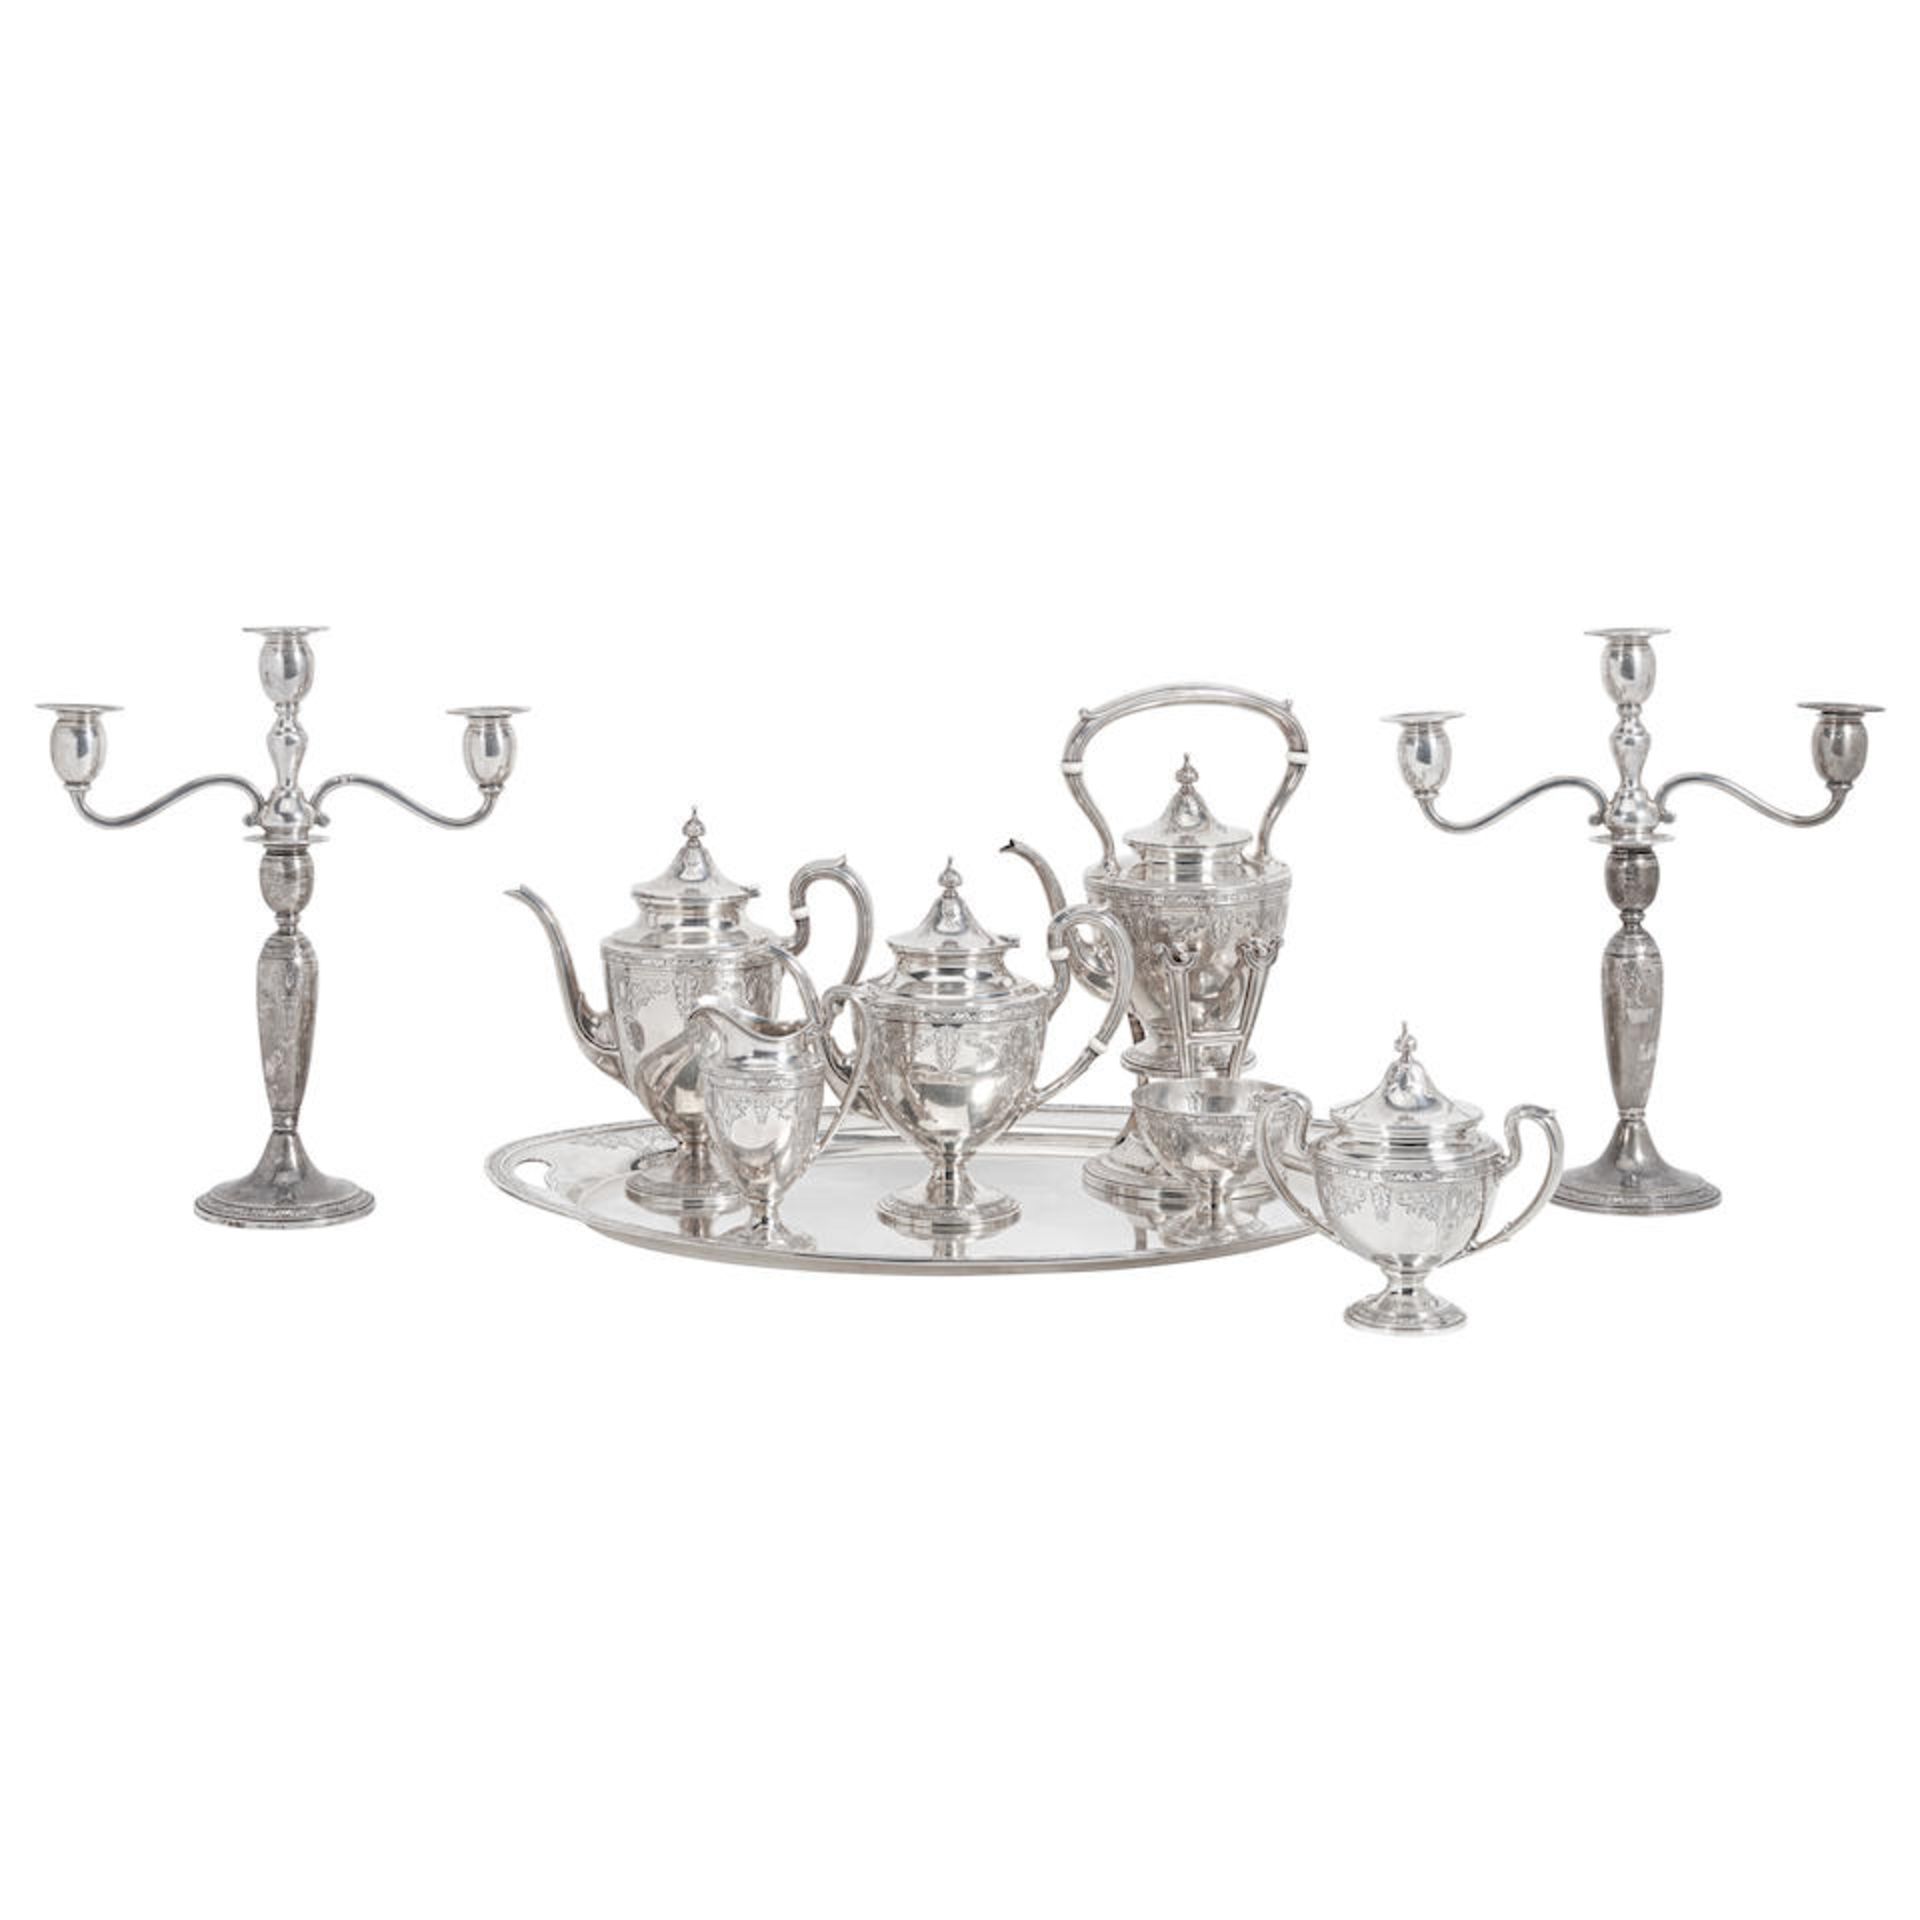 AN AMERICAN STERLING SILVER NINE-PIECE TEA AND COFFEE SERVICE by Gorham, Providence, Rhode Islan...